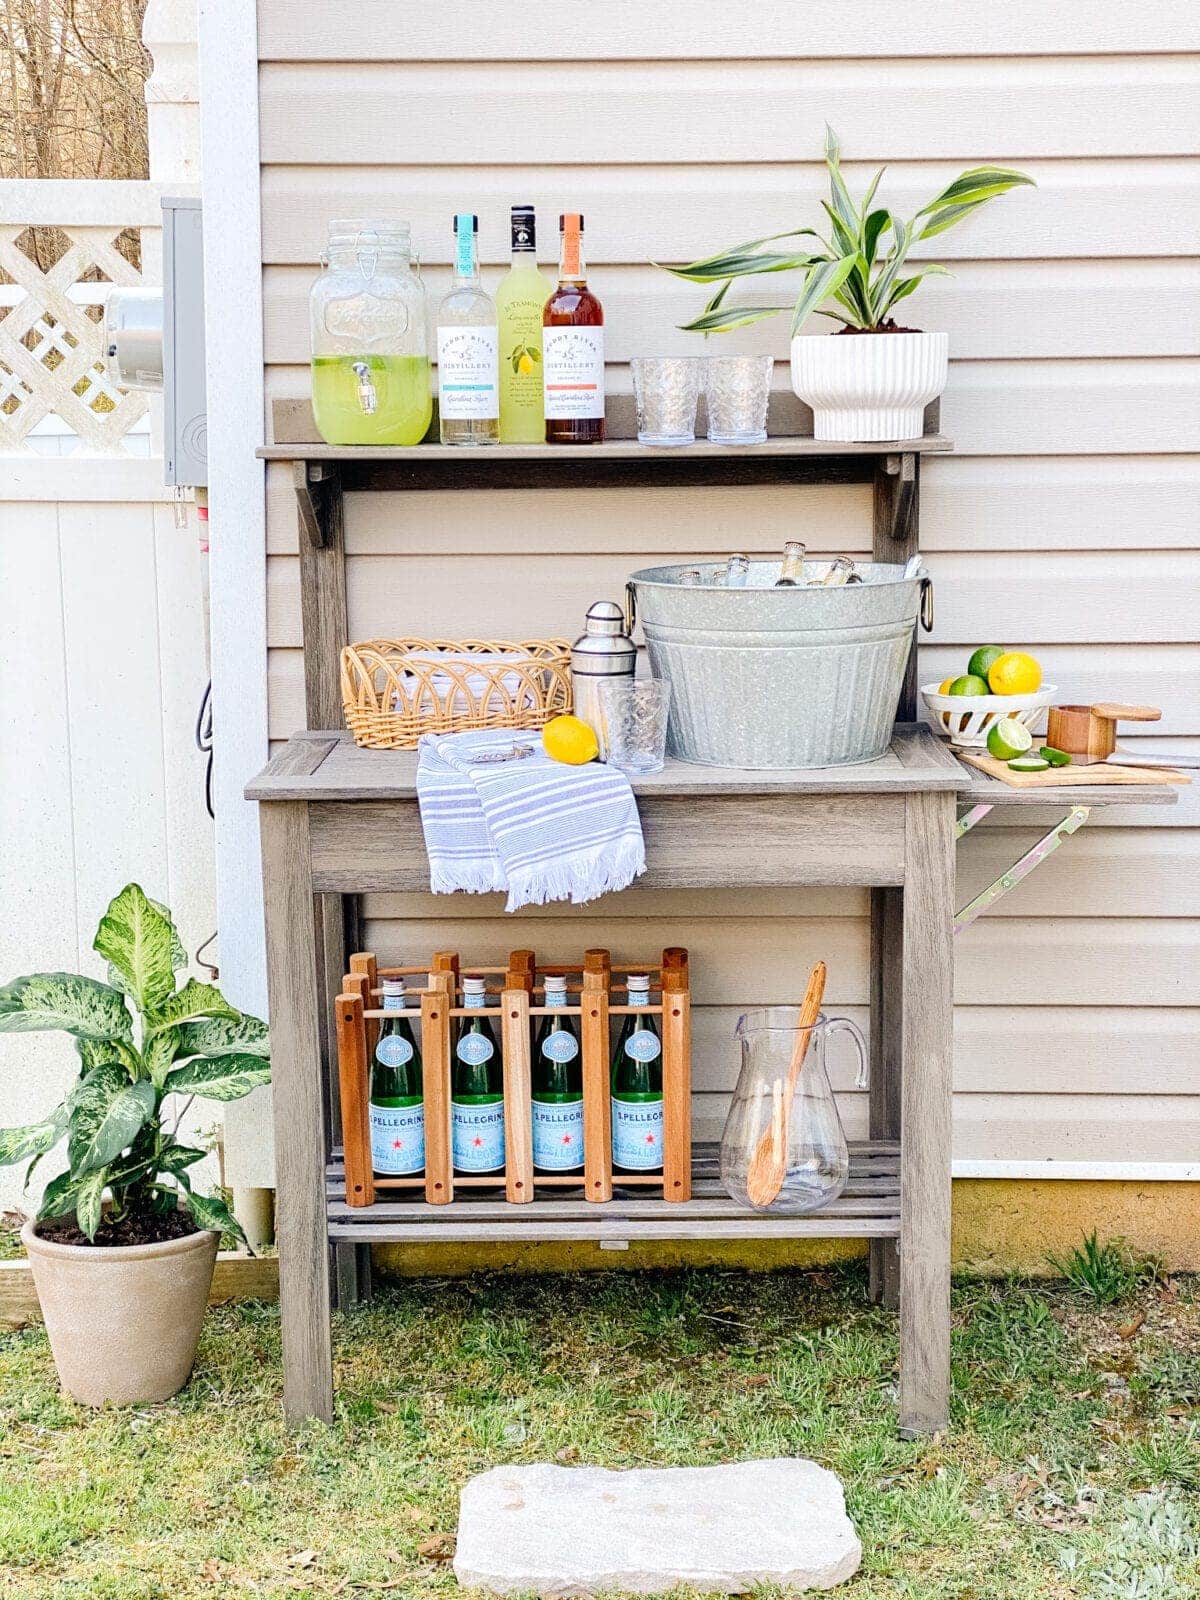 things to buy while thrift shopping : buckets and baskets pictured on outdoor bar